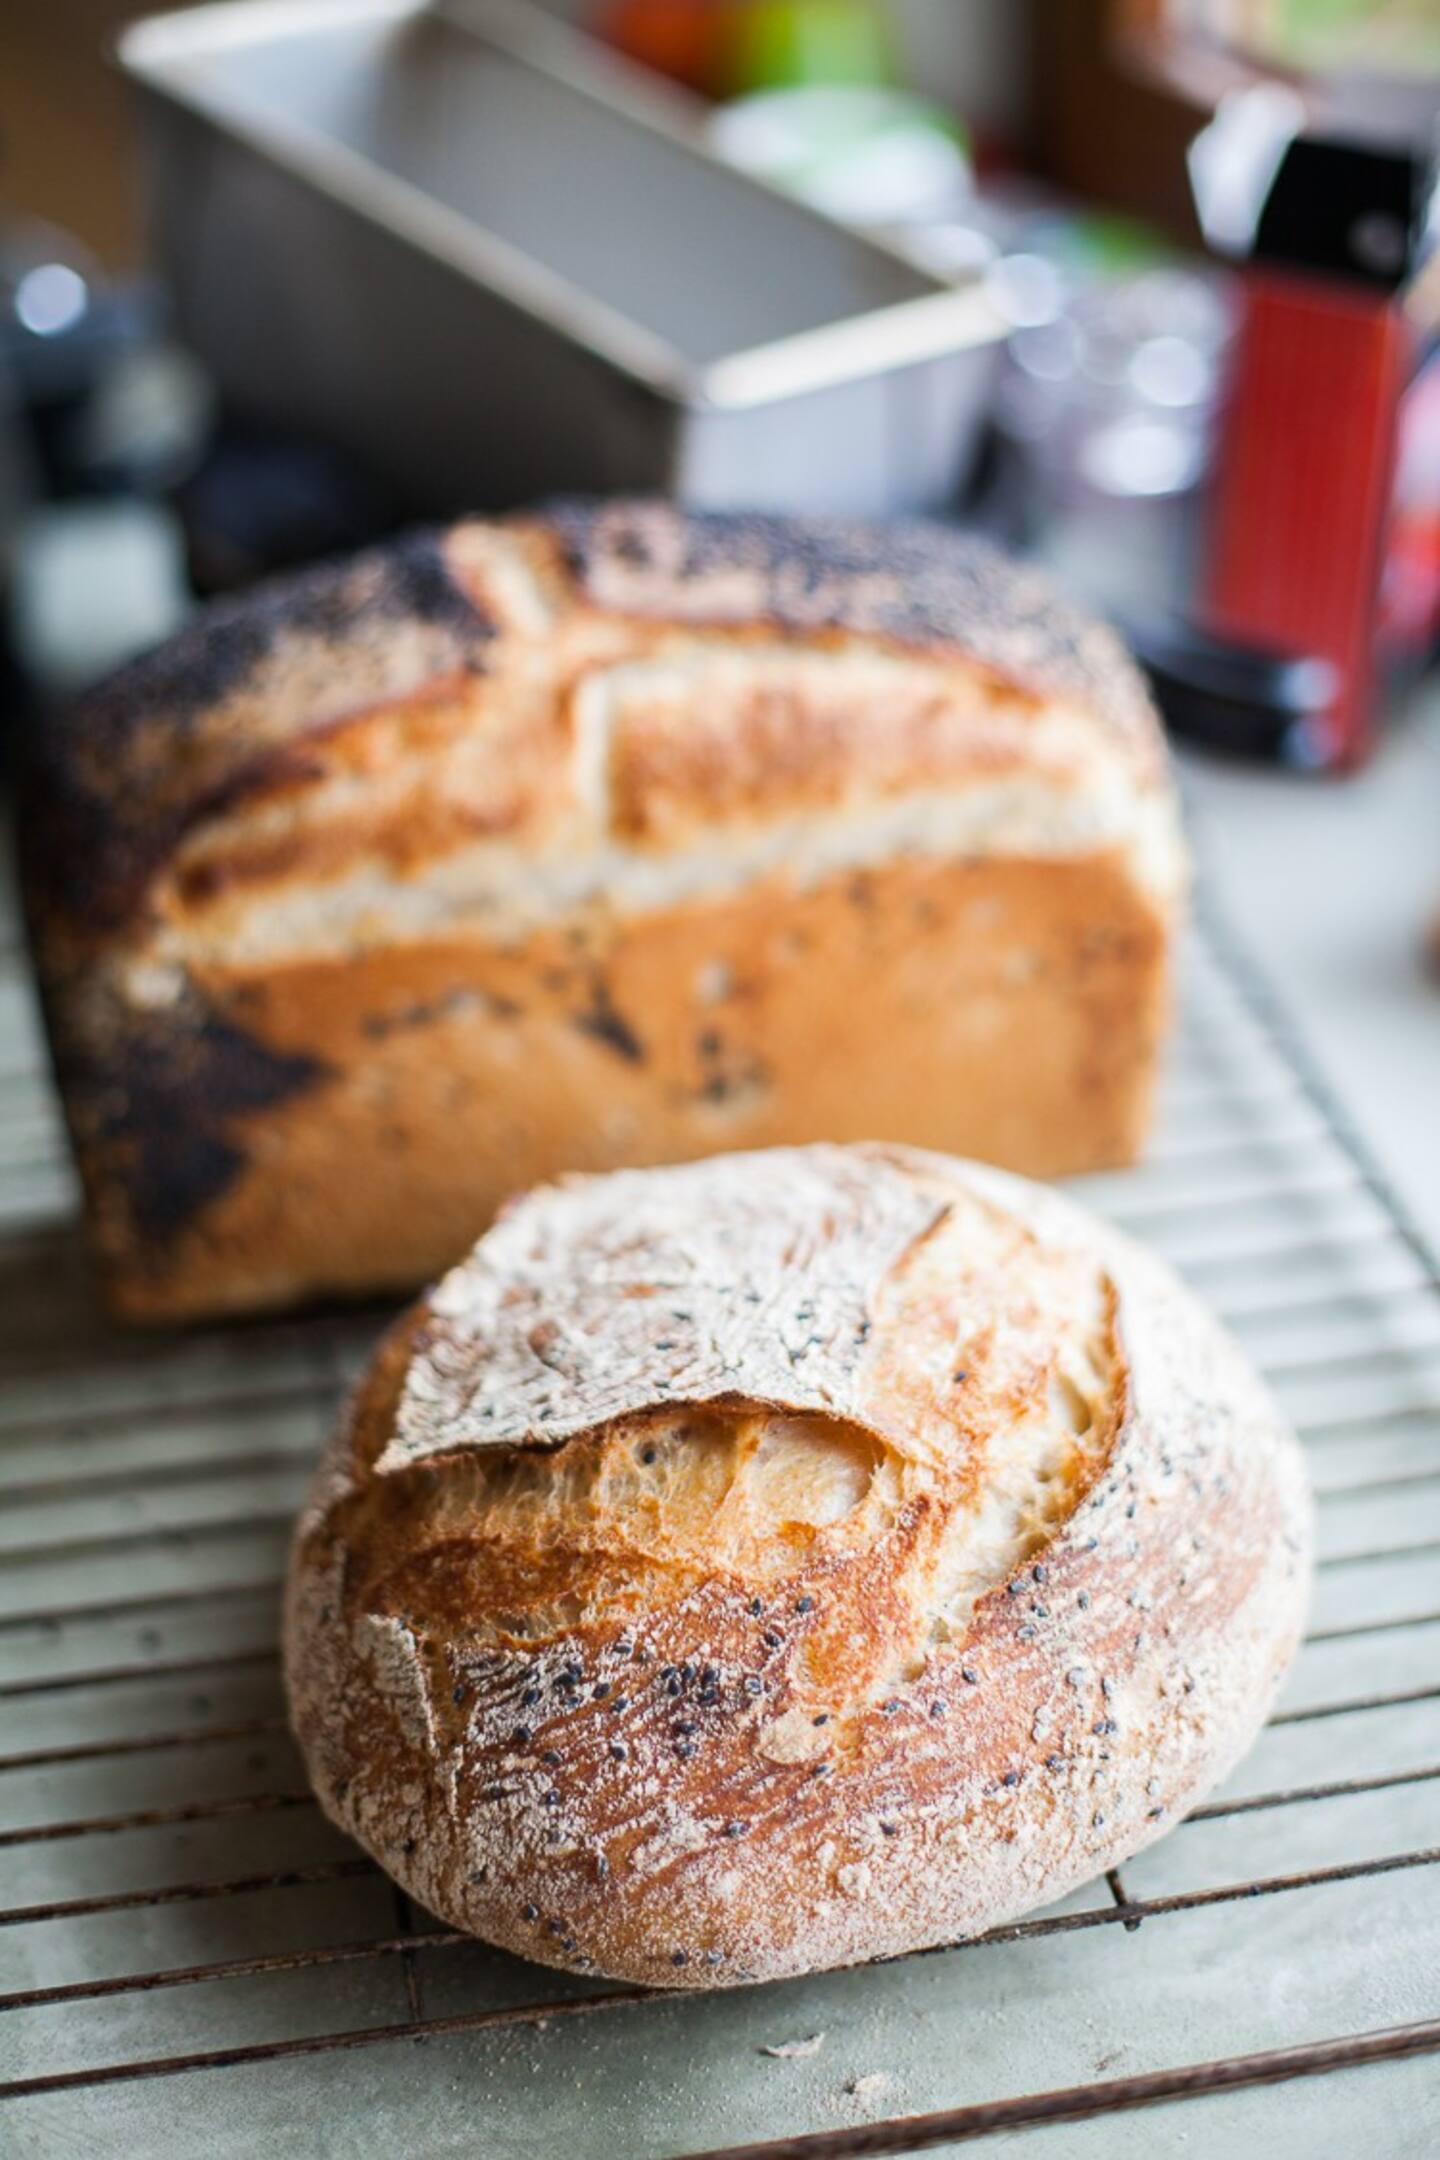 Learn to bake bread while ahe Orto Farm Stay near Daylesford, Victoria